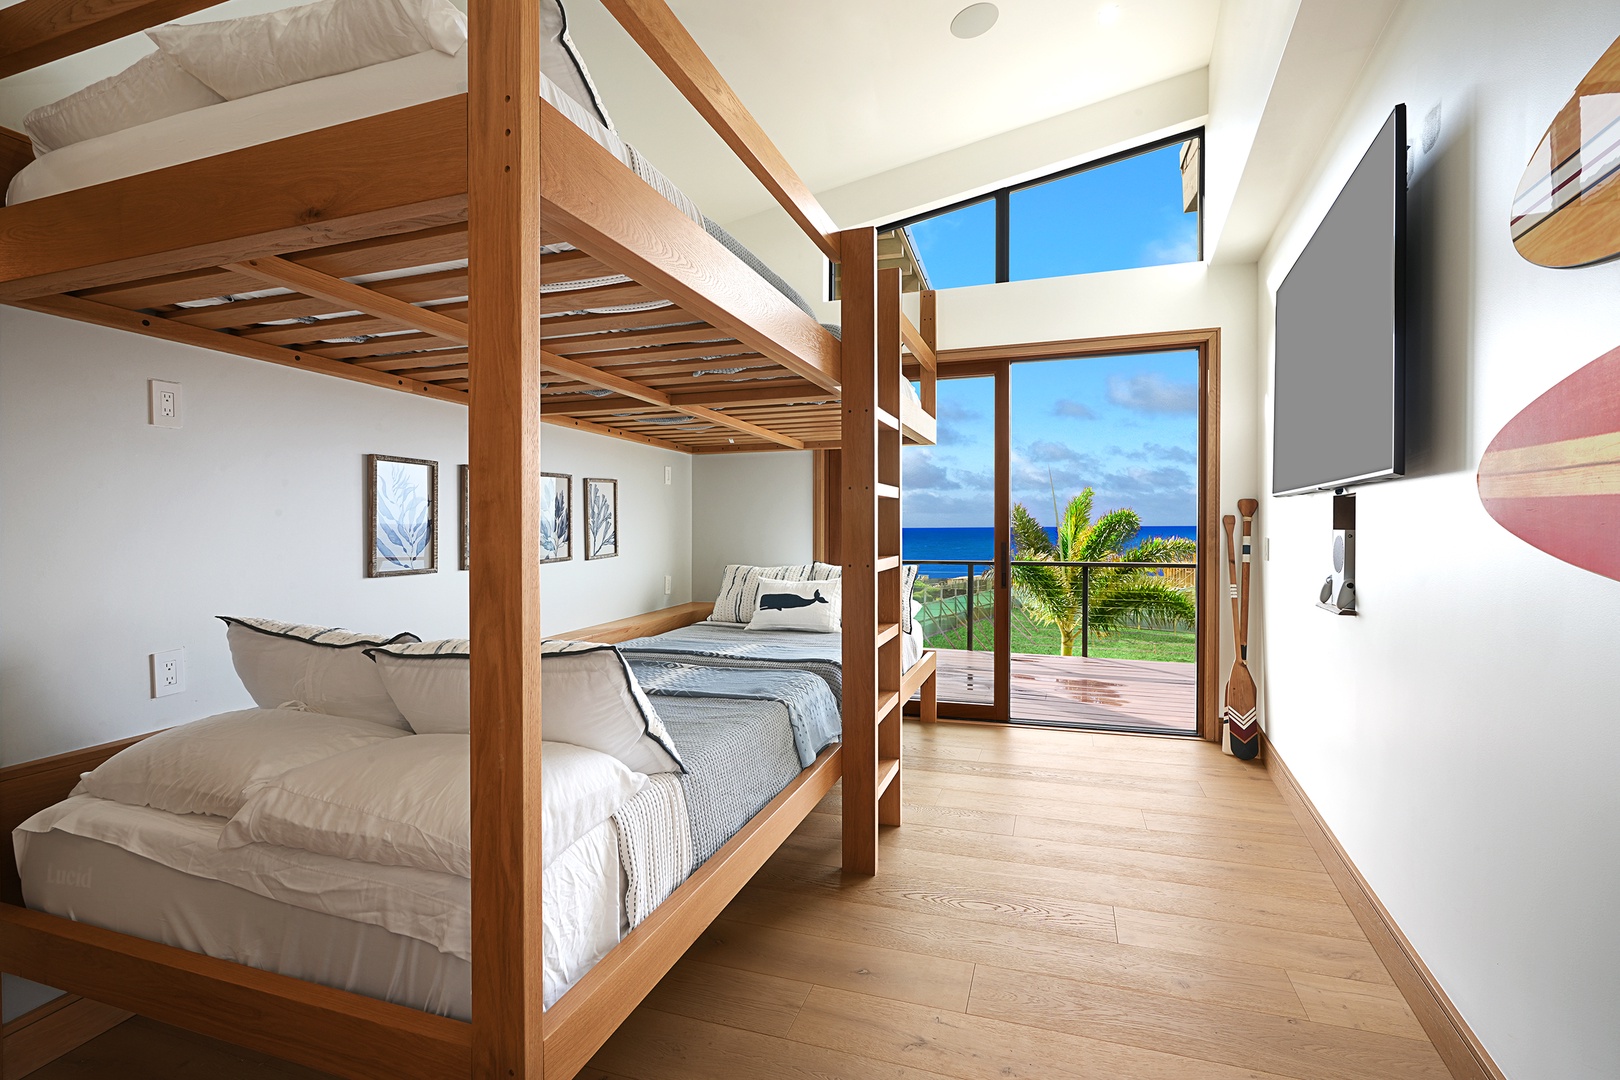 Koloa Vacation Rentals, Hale Makau - The bunk bedroom with sleeping for eight, floor-to-ceiling glass windows and access to private lanai.